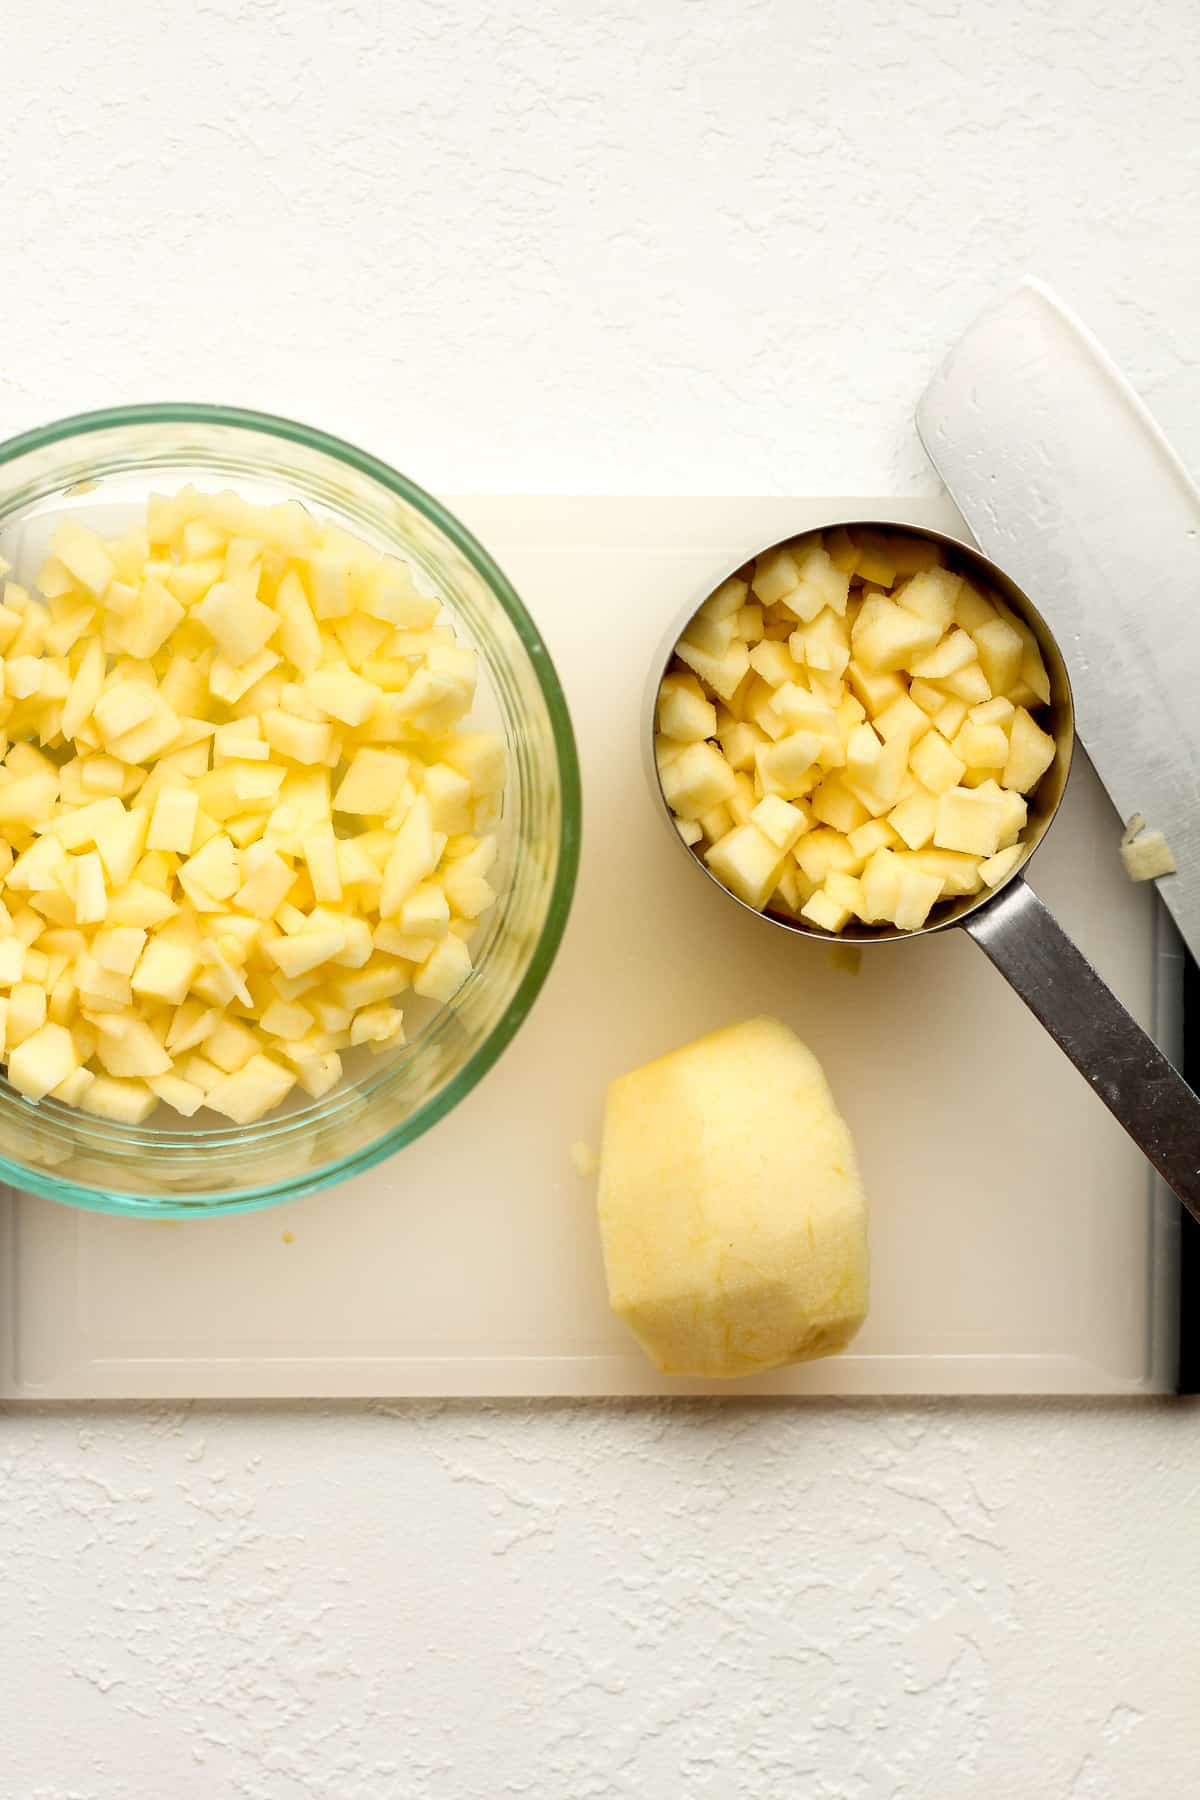 A bowl of diced apples with a knife on a cutting board.